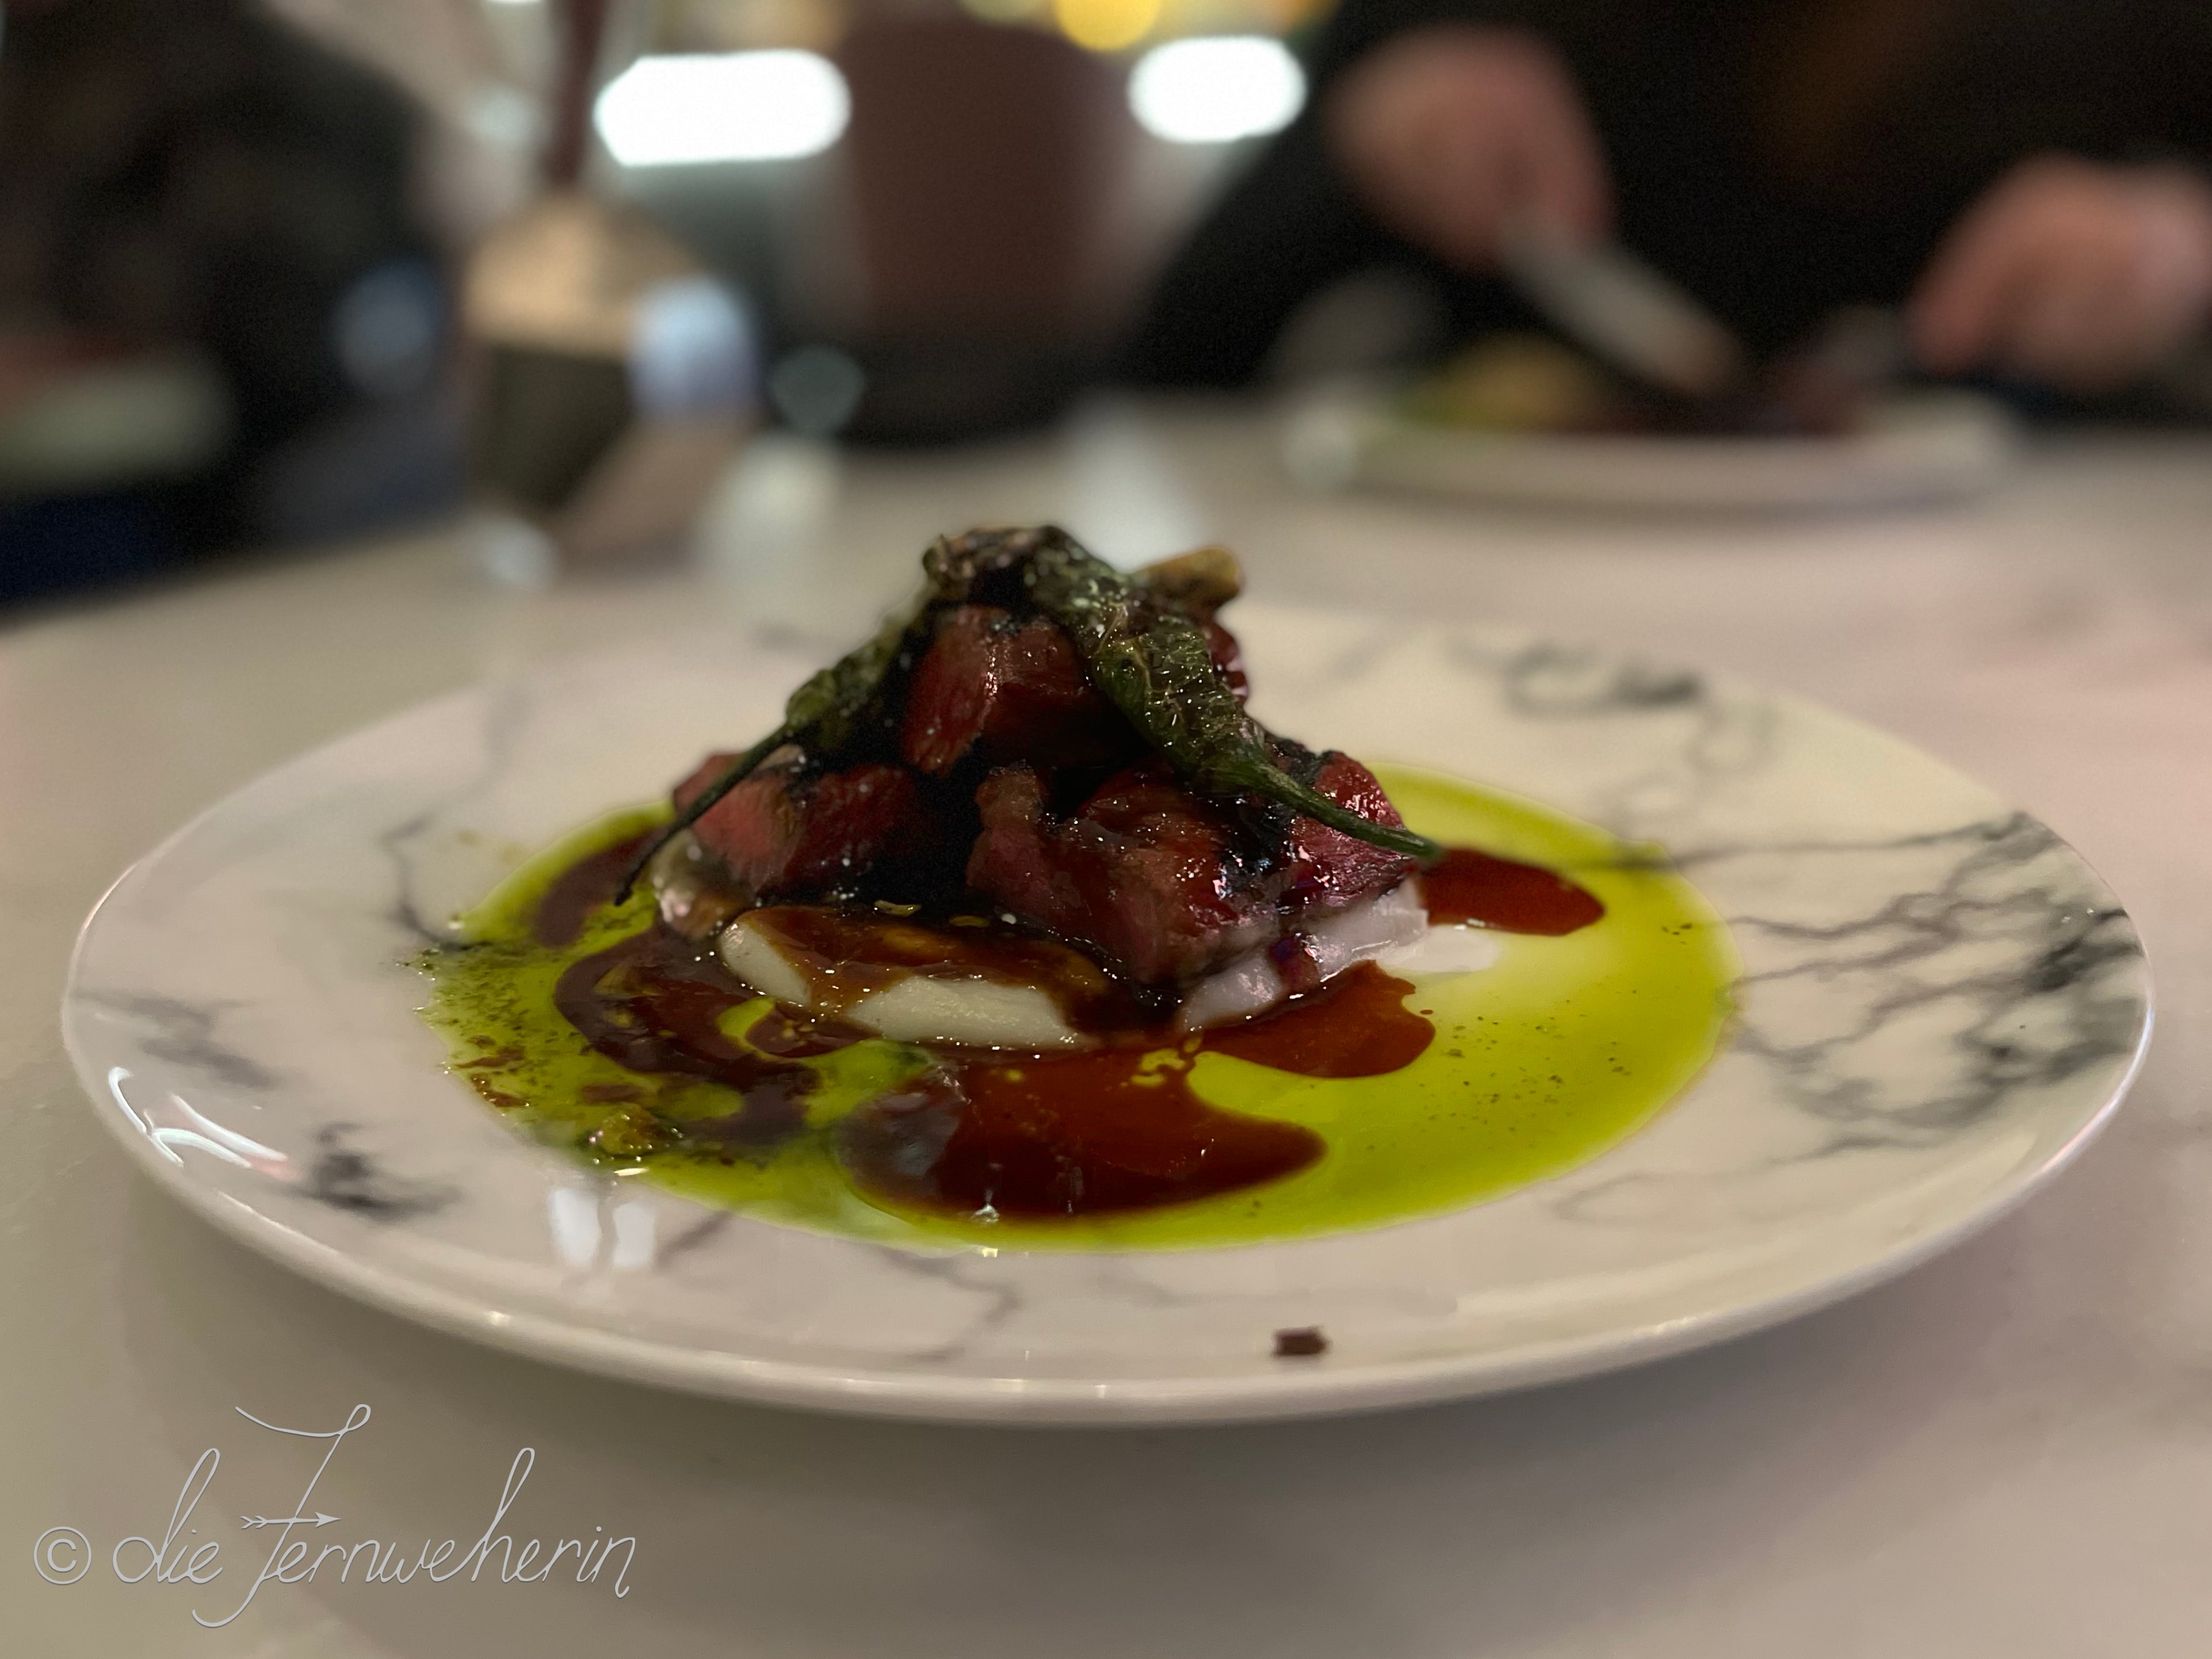 The BBQ Lamb Saddle, atop a pistachio pesto & sunchoke purée, and topped with blistered shishito peppers, at the Fairview Bar & Restaurant.